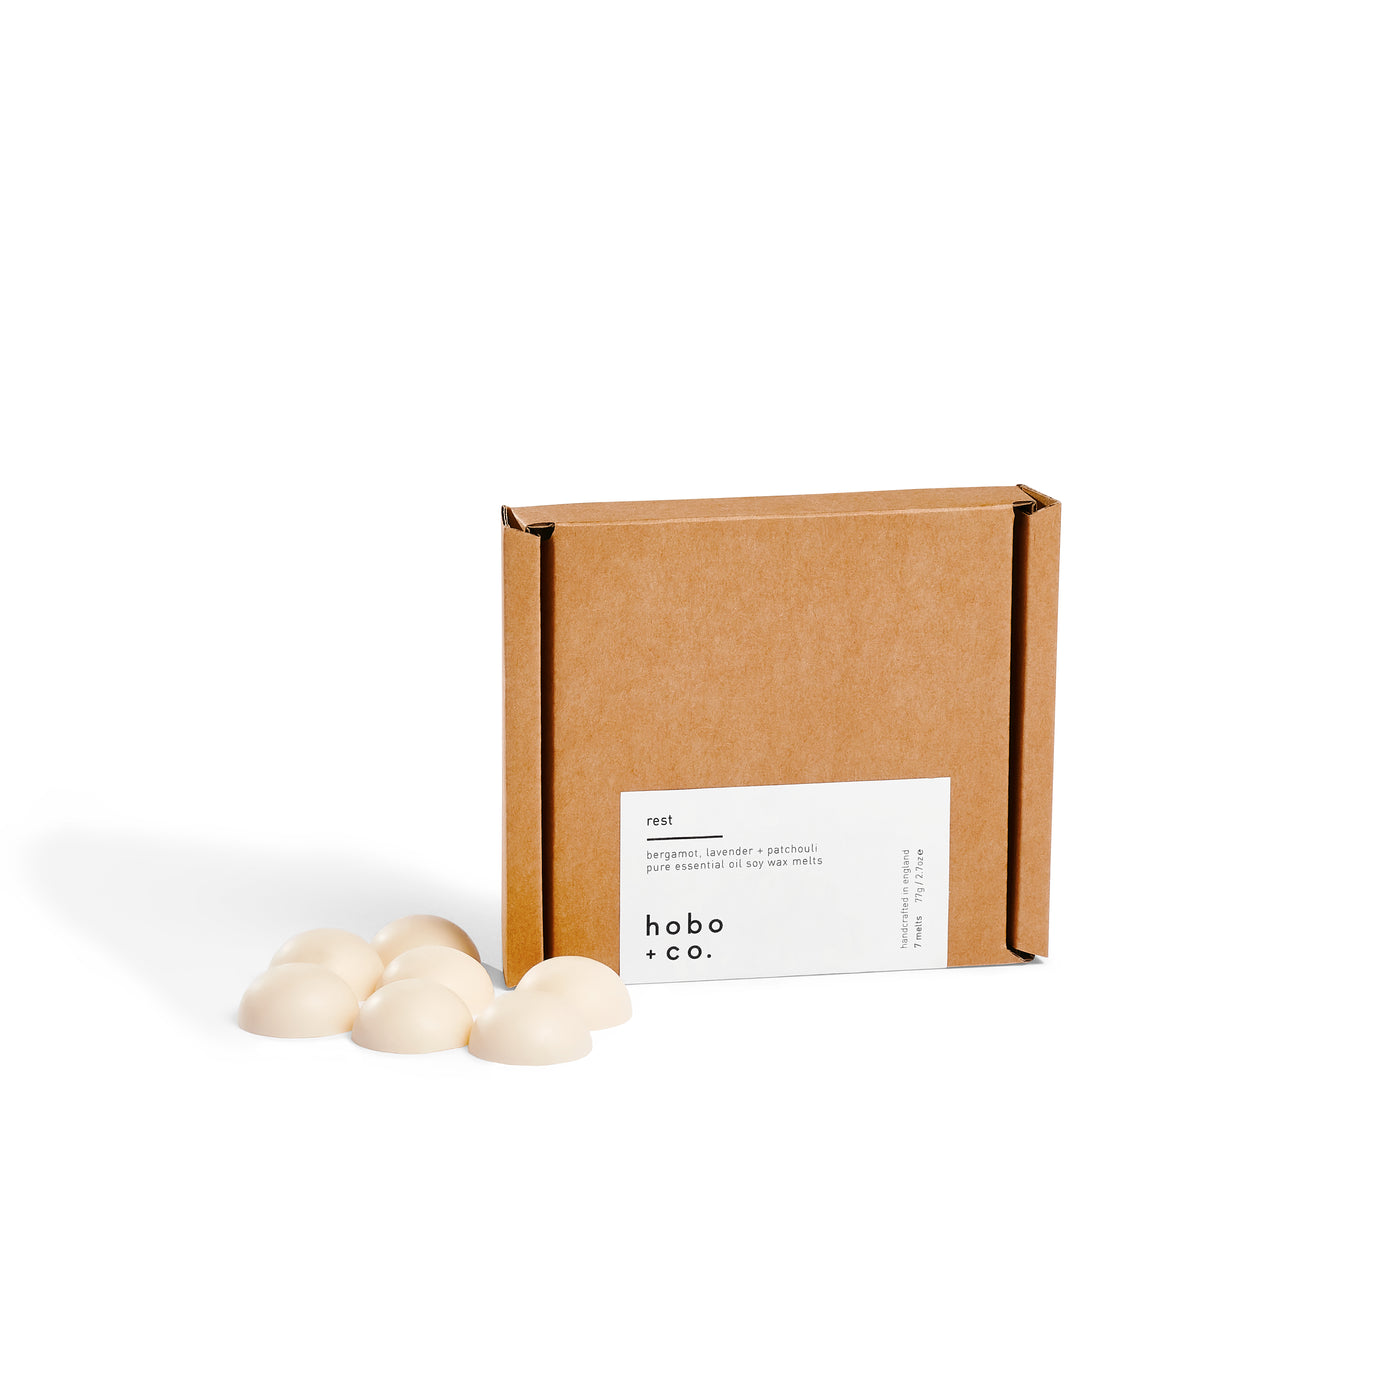 Hobo + Co Rest Aromatherapy Essential Oil Soy Wax Melts